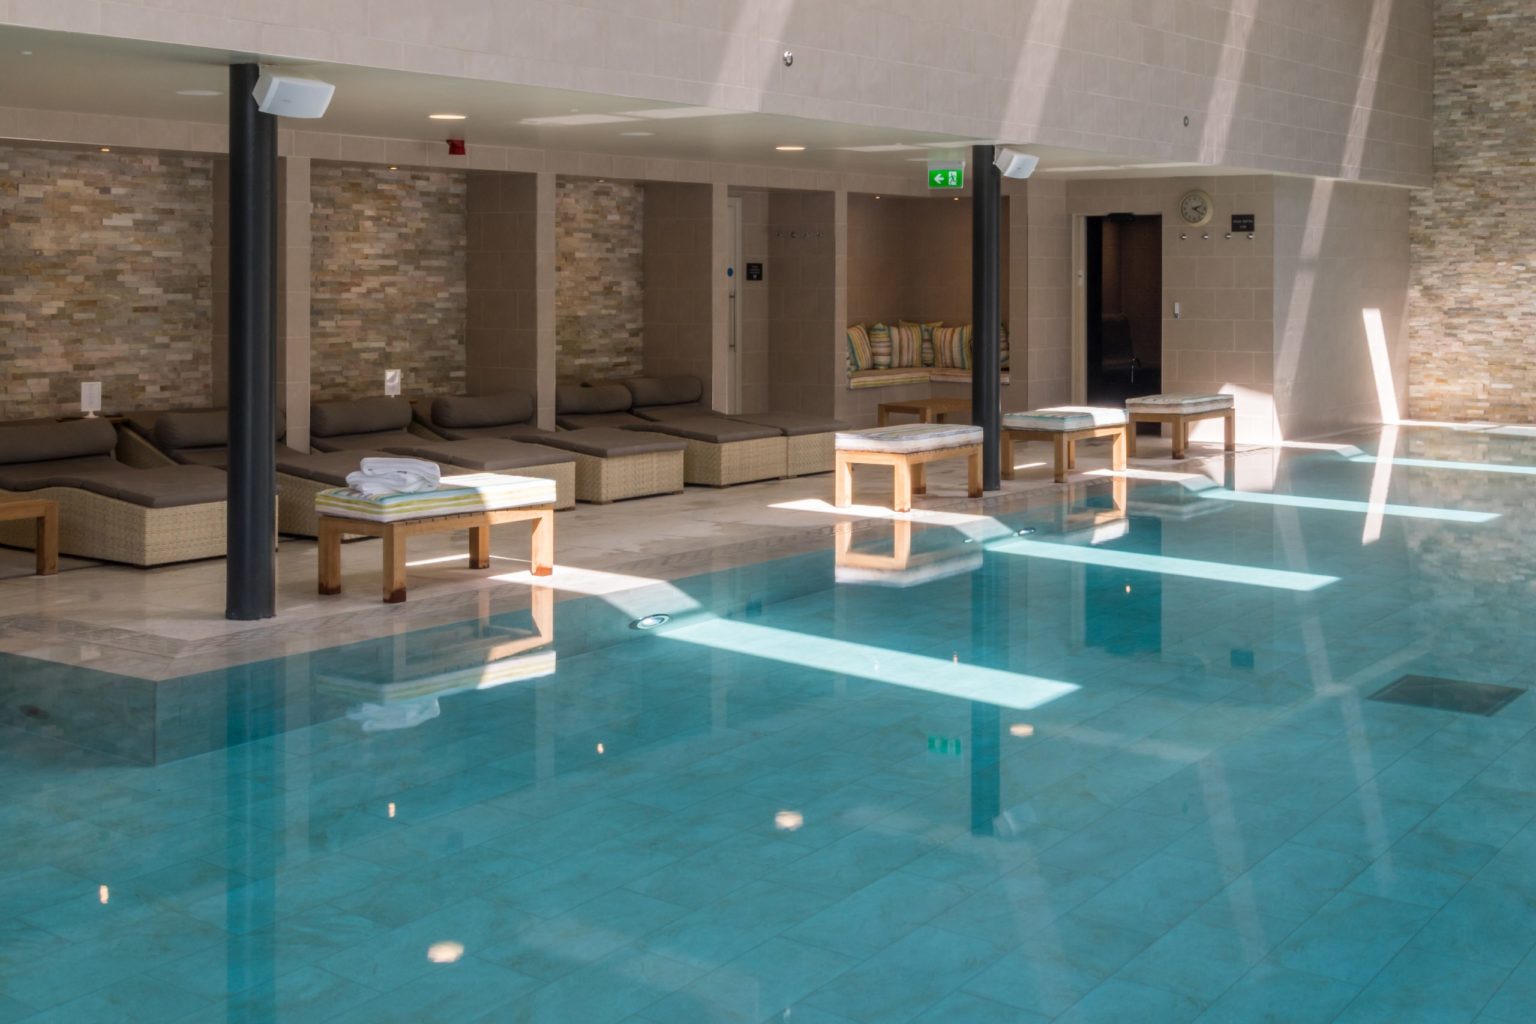 The poolside of the indoor swimming pool at Swinton Country Club in North Yorkshire